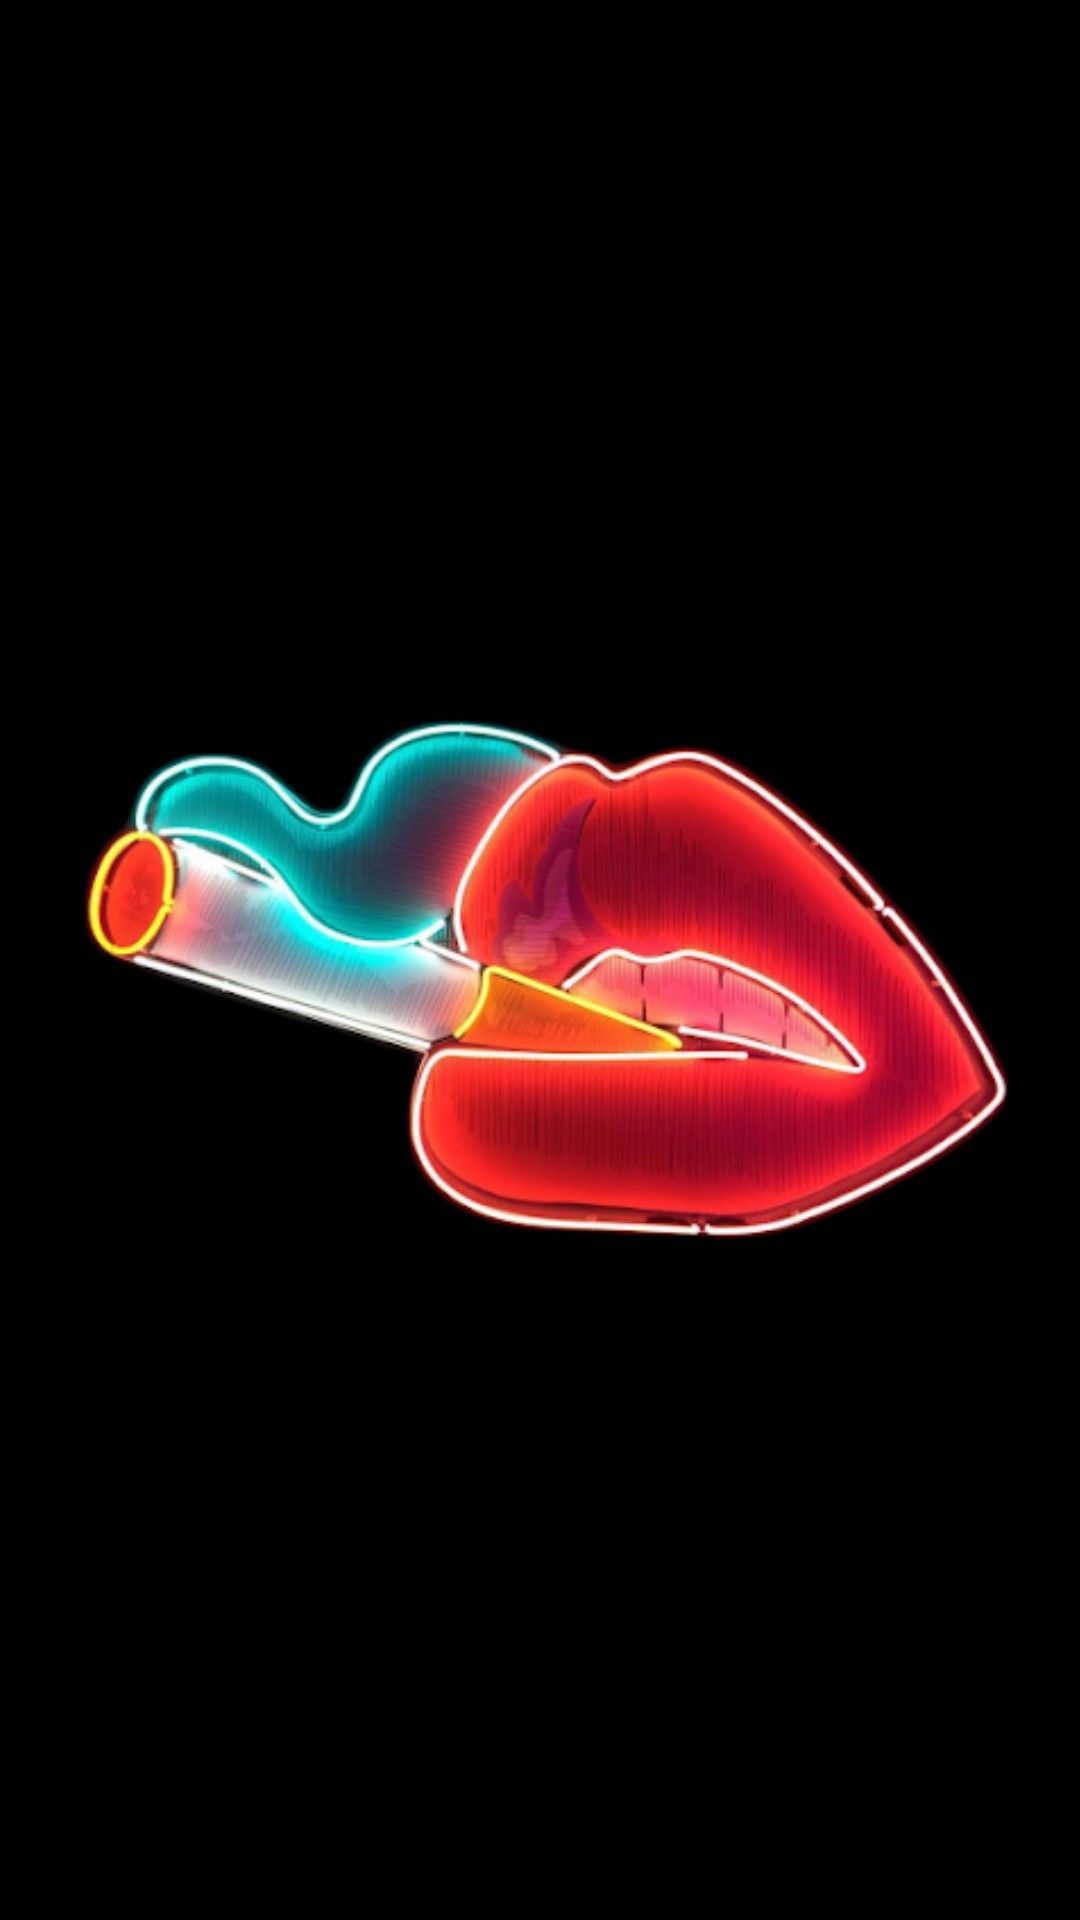 A neon red and pink lip with cigarette - Smoke